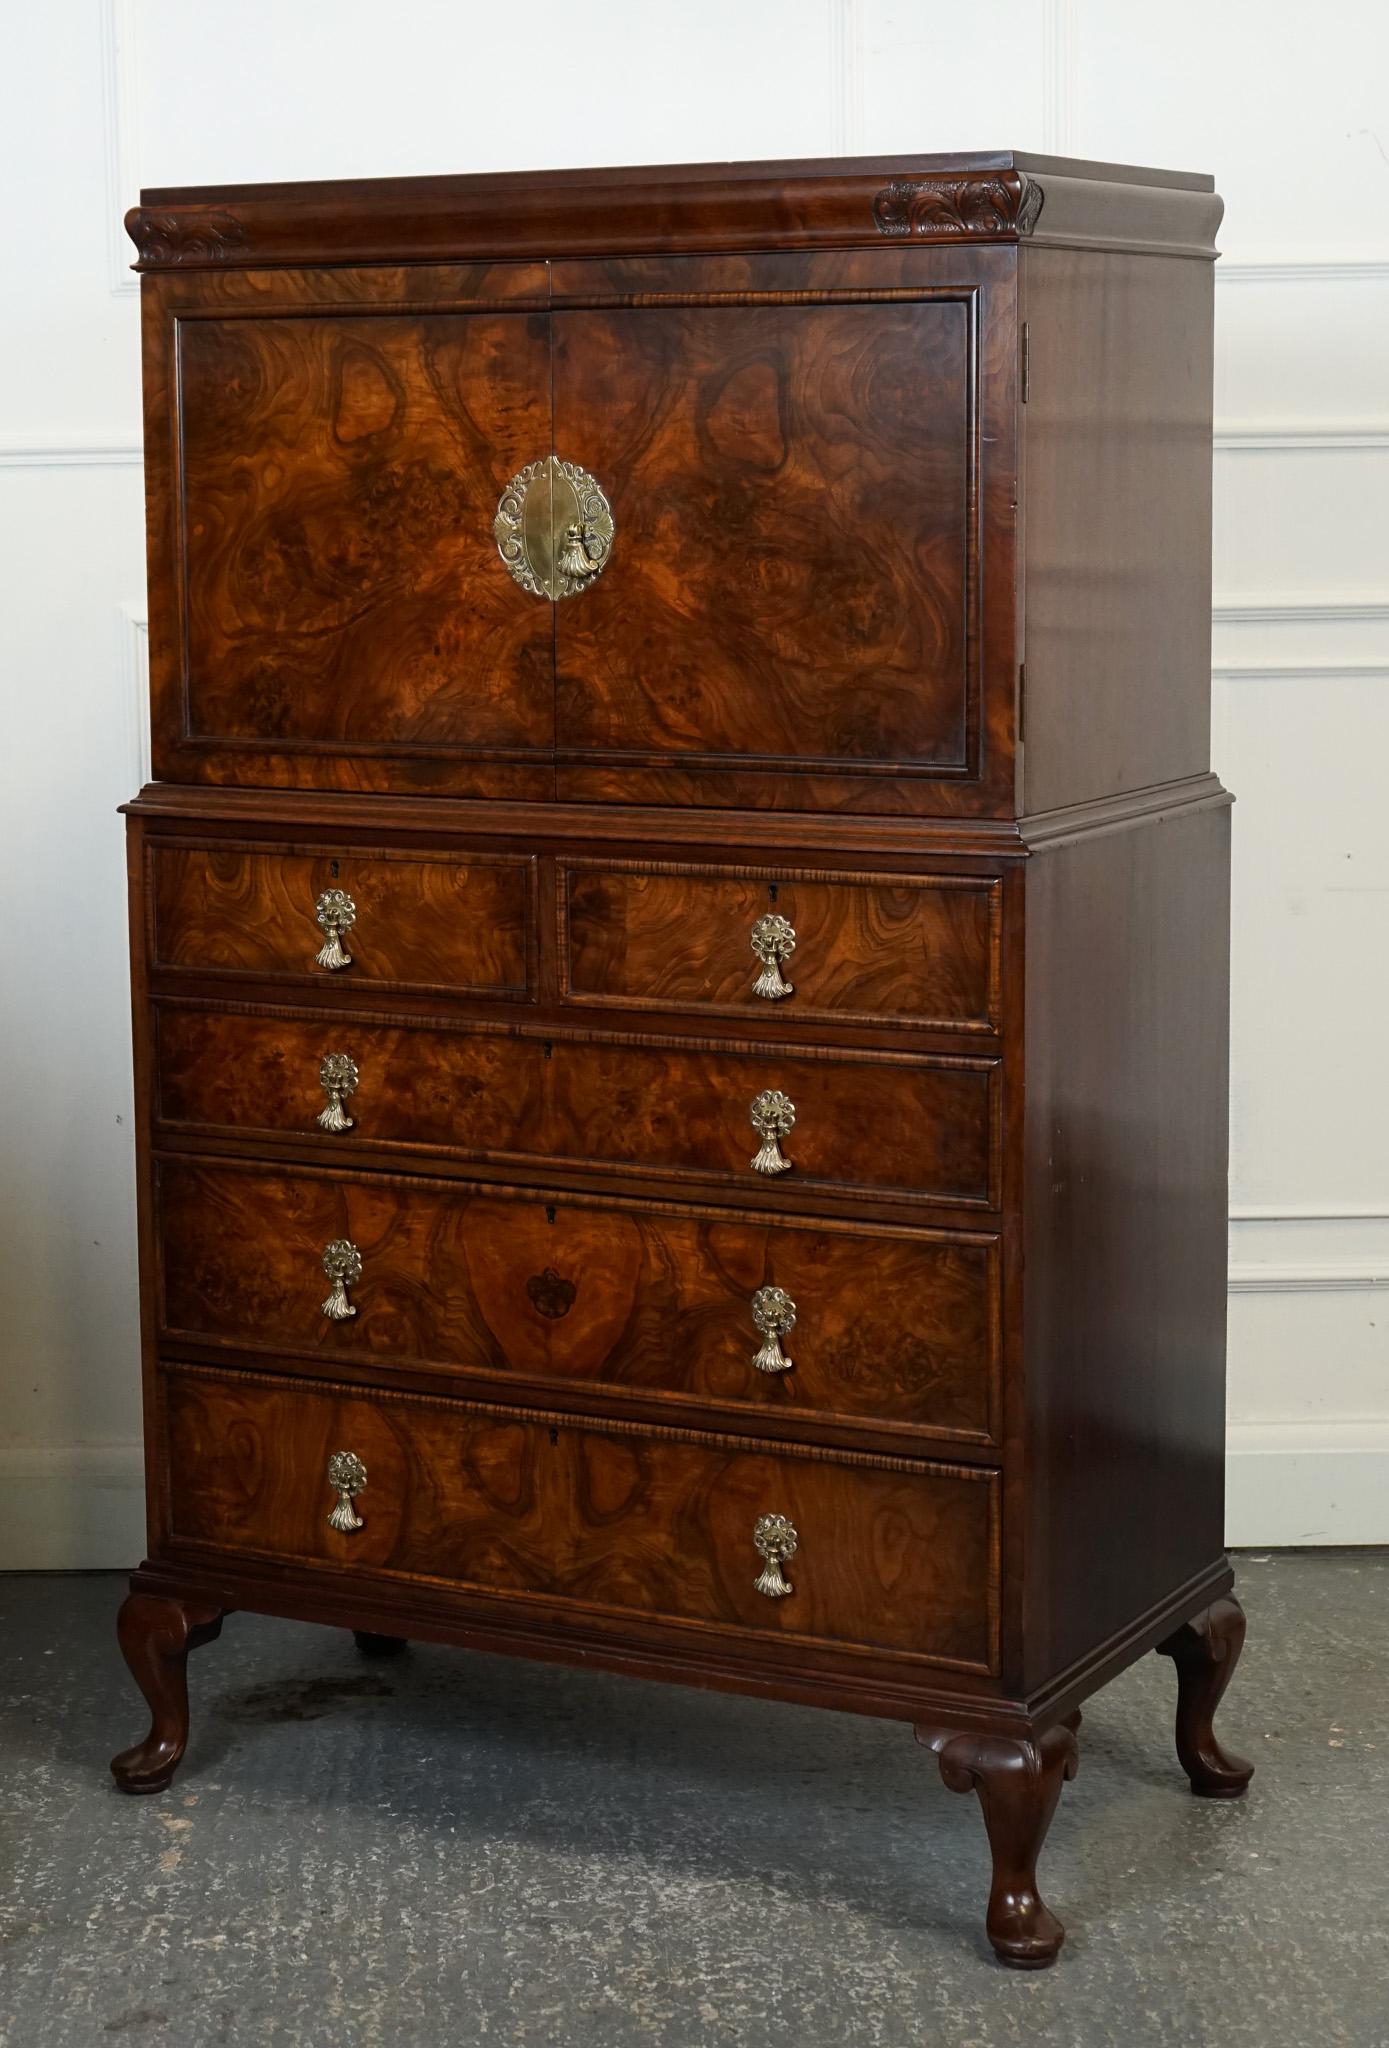 

We are delighted to offer for sale this Exquisite Tallboy Linen Press Chest of Drawers. 

Is crafted in the elegant English Queen Anne style, with a stunning walnut veneer that showcases intricate figure patterns. It was constructed during the